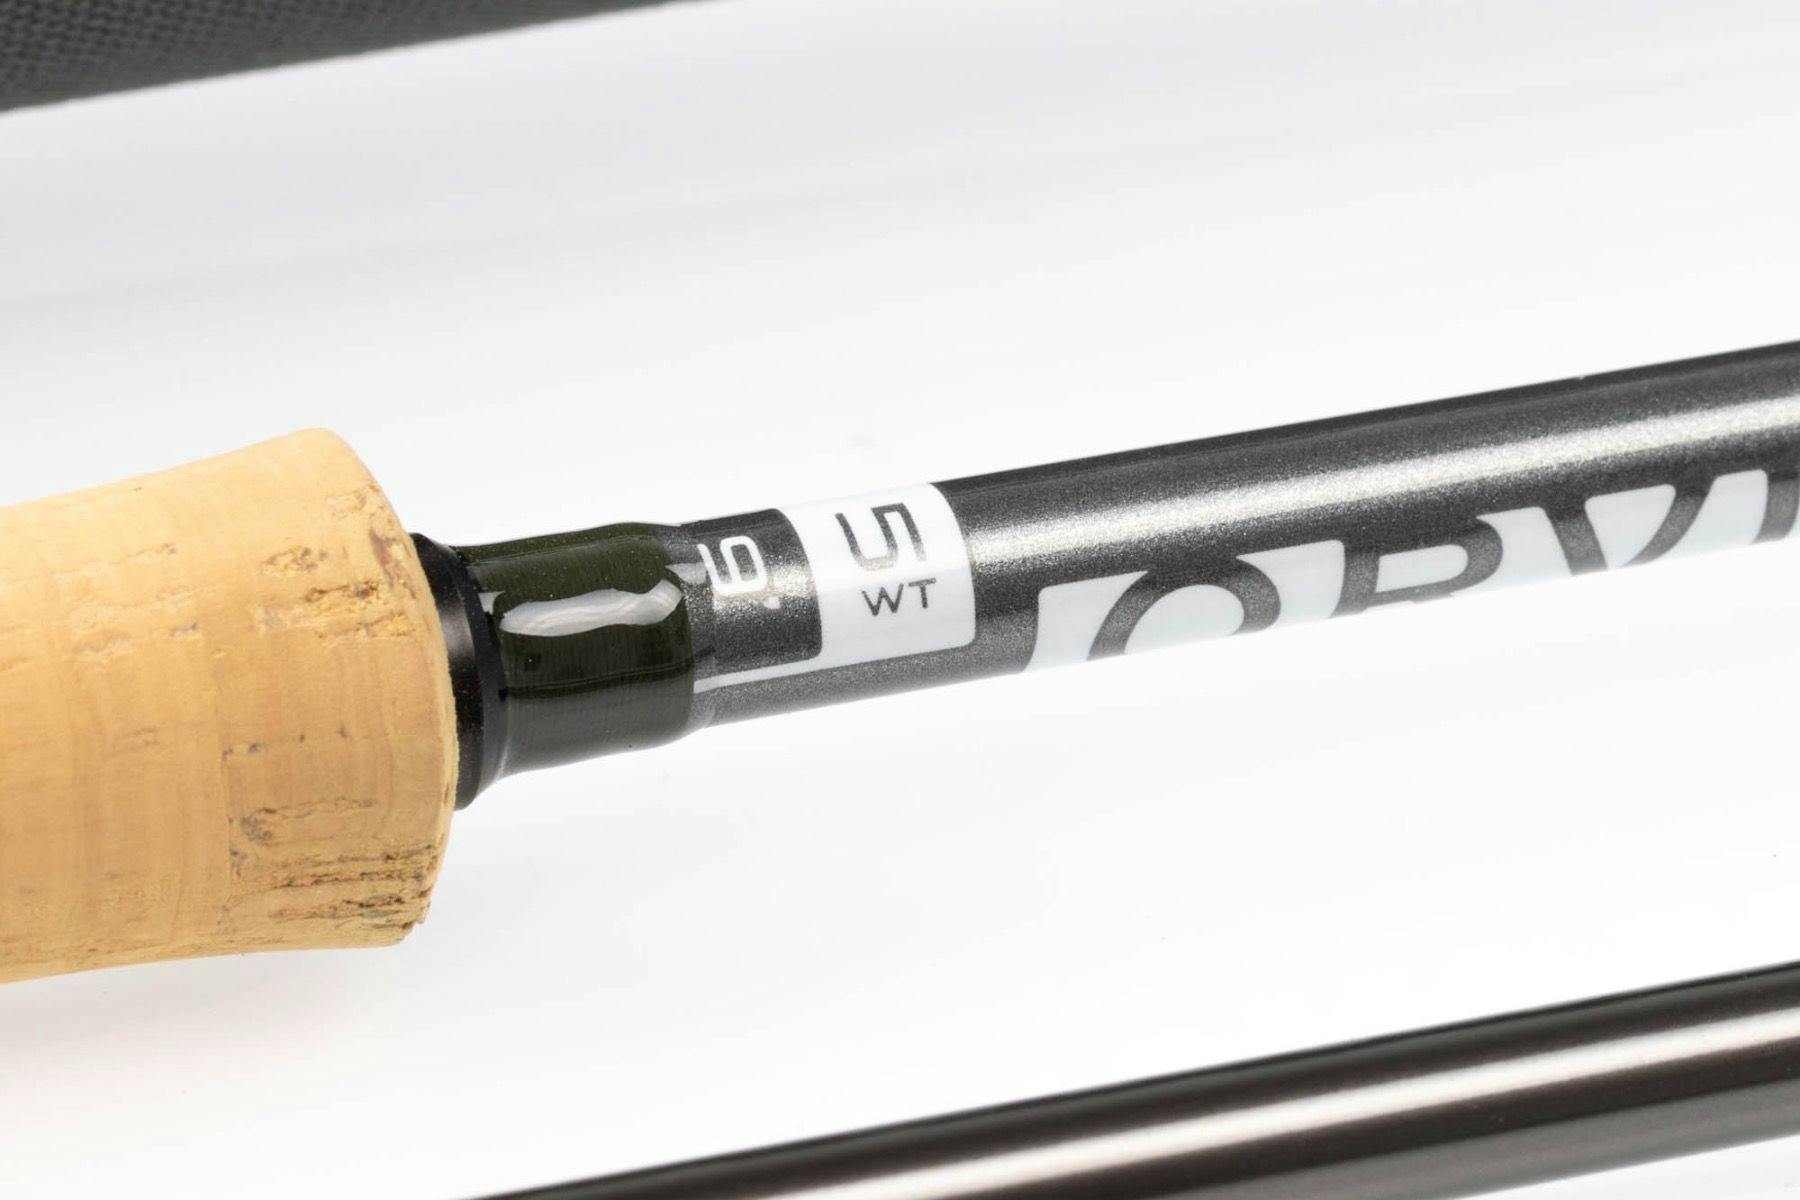 Orvis Clearwater Fly Rod · 9' · 8 wt